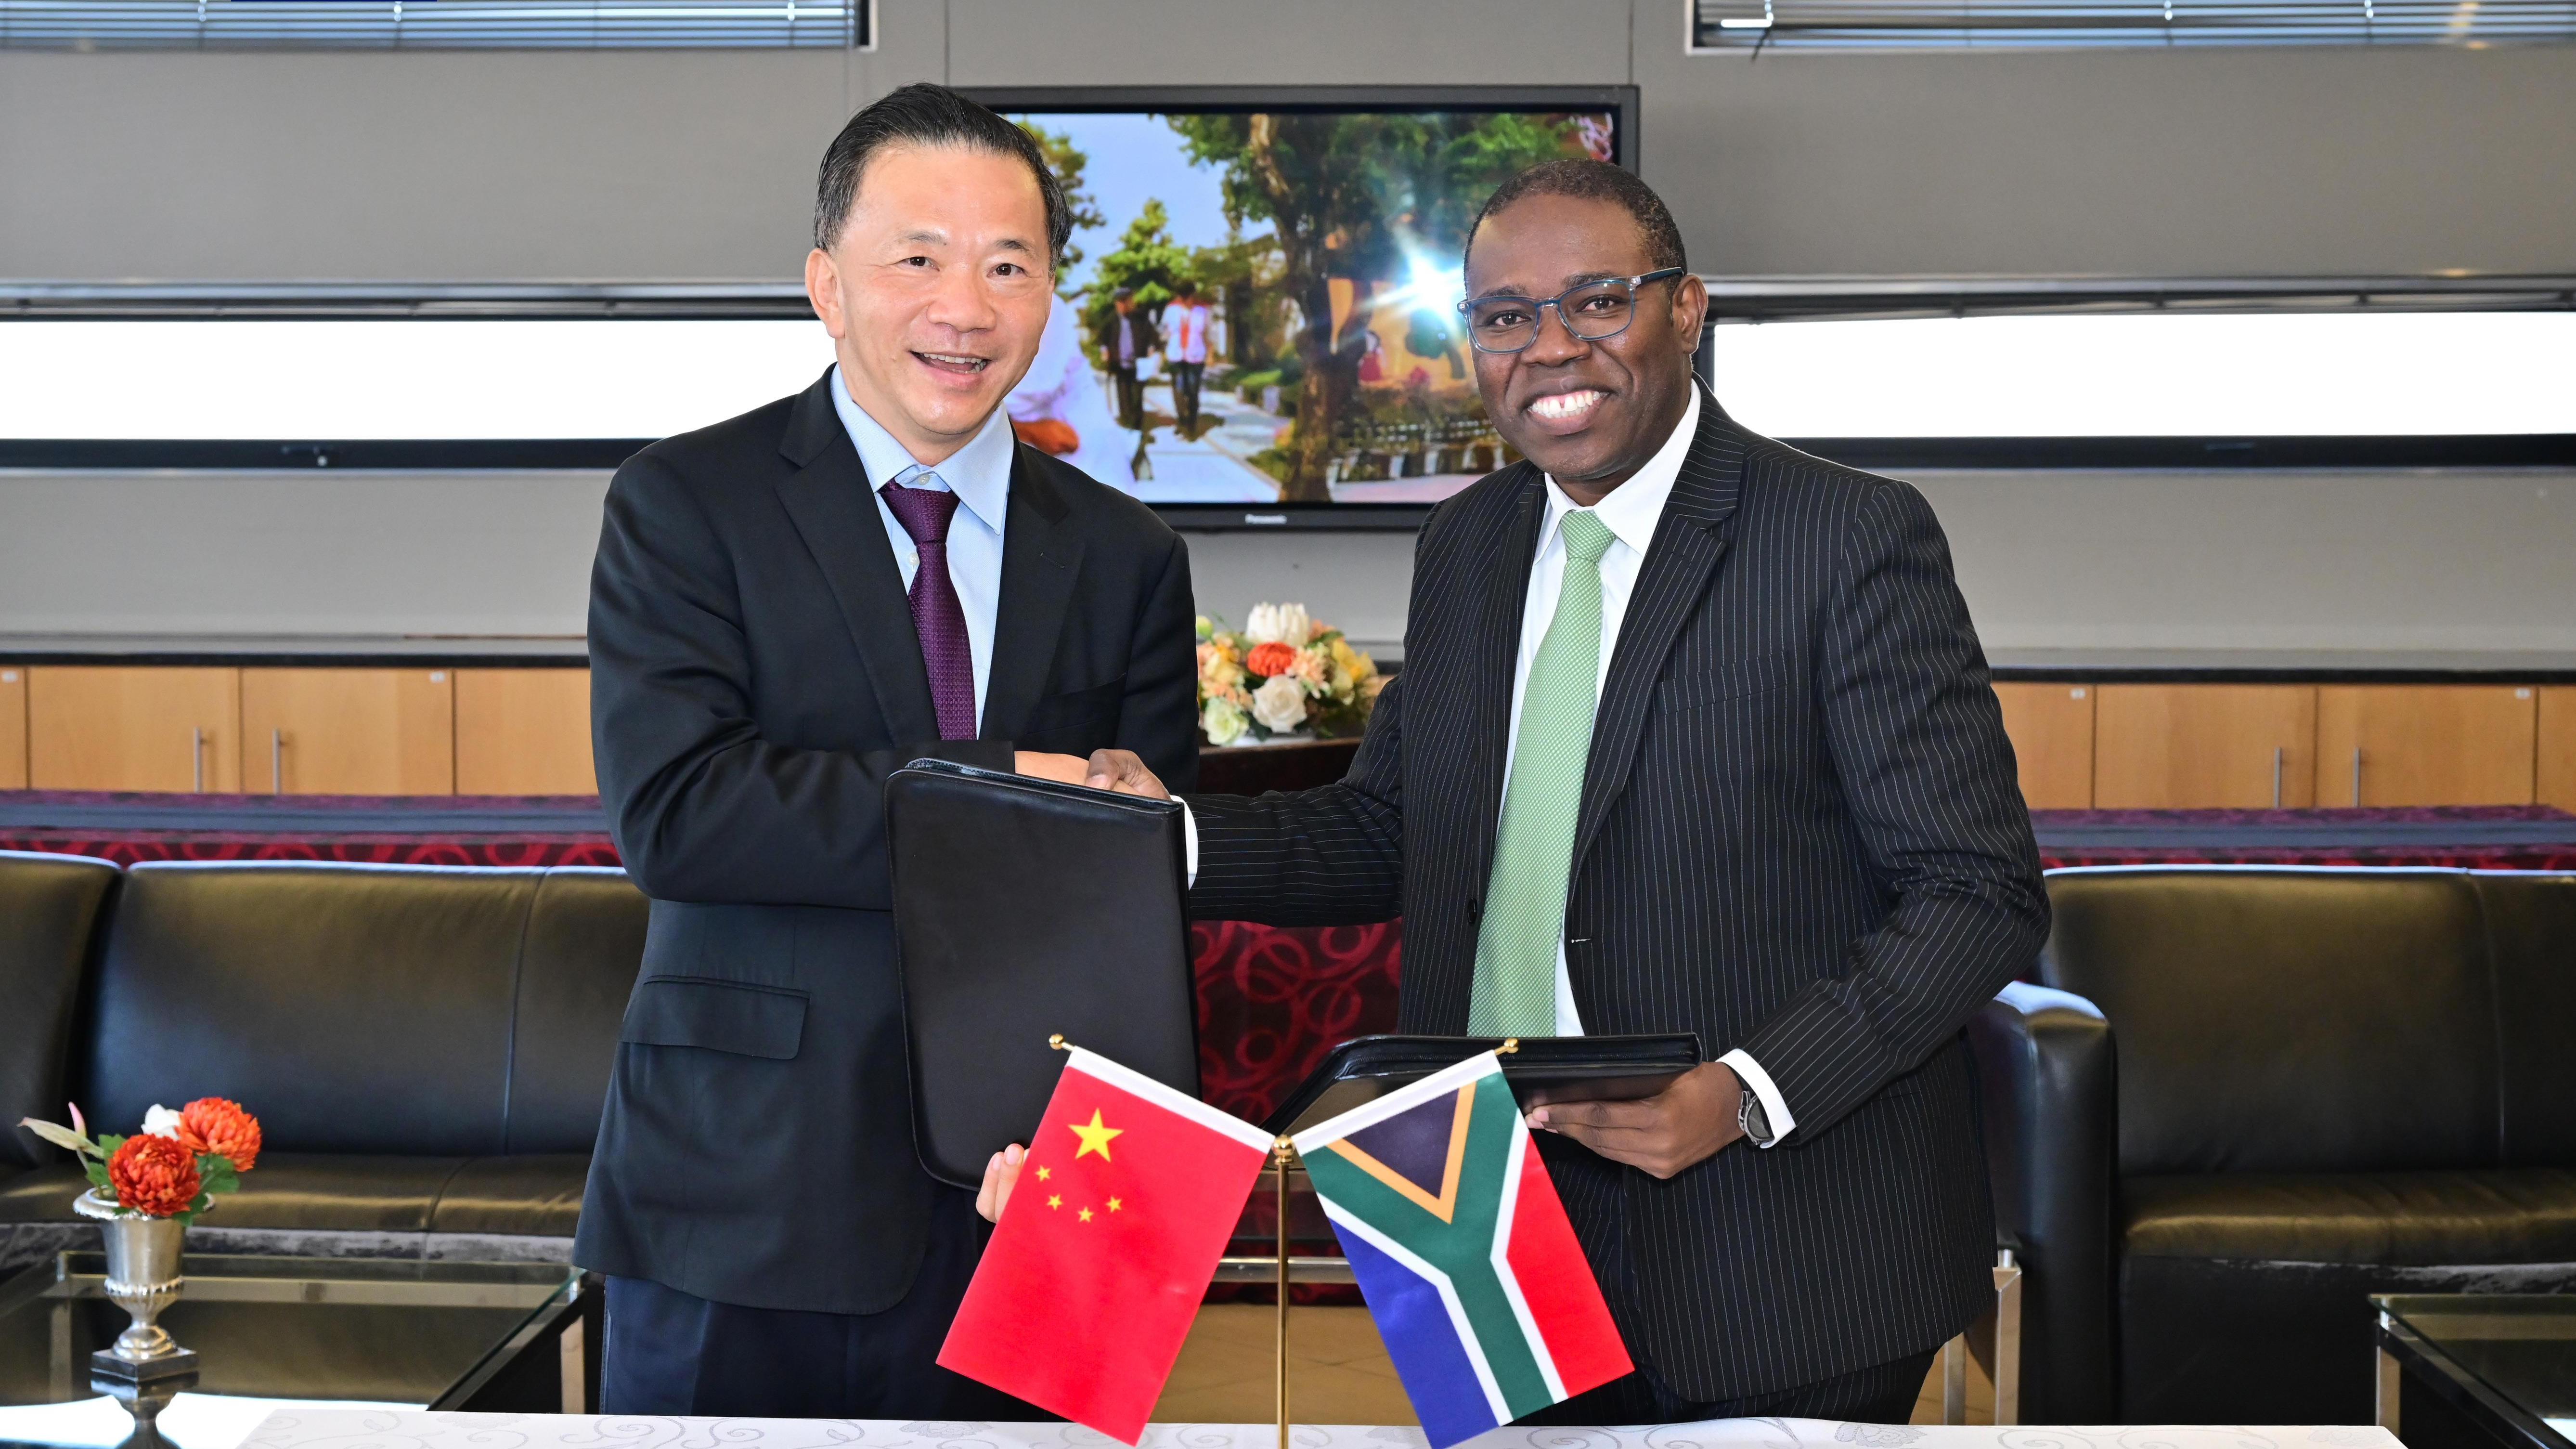 Shen Haixiong, the president of China Media Group (CMG), and Letlhokwa George Mpedi, the vice chancellor and principal at the University of Johannesburg (UJ), sign an agreement aimed at enhancing cooperation and exchanges, Johannesburg, South Africa, August 23, 2023. /CMG